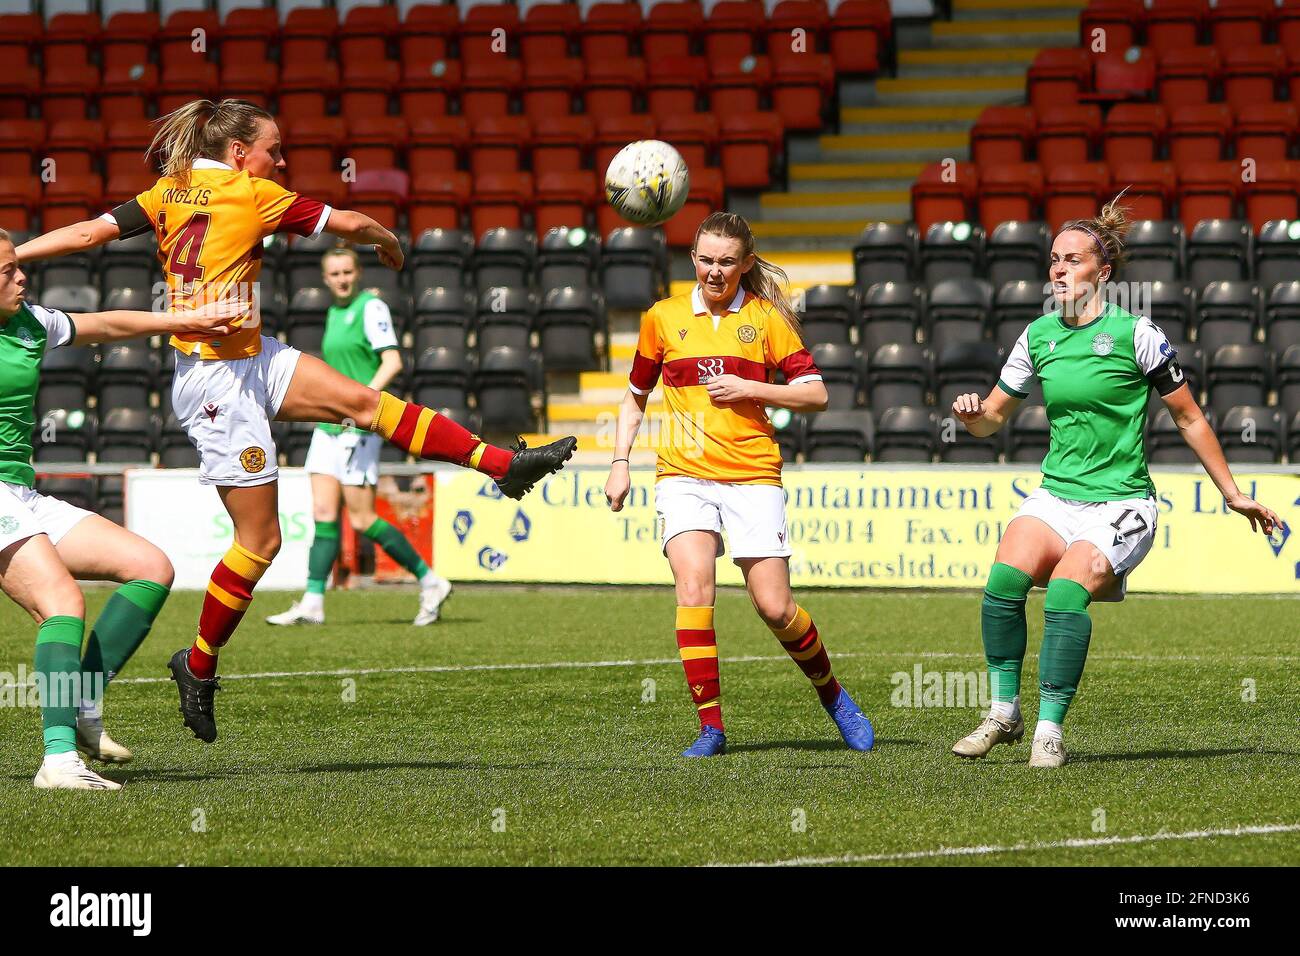 Airdrie, North Lanarkshire, 16th May 2021. Gillian Inglis (#14) of Motherwell Women FC fires over the bar from close range during the Scottish Building Society Scottish Women's Premier League 1 Fixture Motherwell FC Vs Hibernian FC, Penny Cars Stadium, Airdrie, North Lanarkshire, 16th May 2021 | Credit Colin Poultney |  Credit: Colin Poultney/Alamy Live News Stock Photo